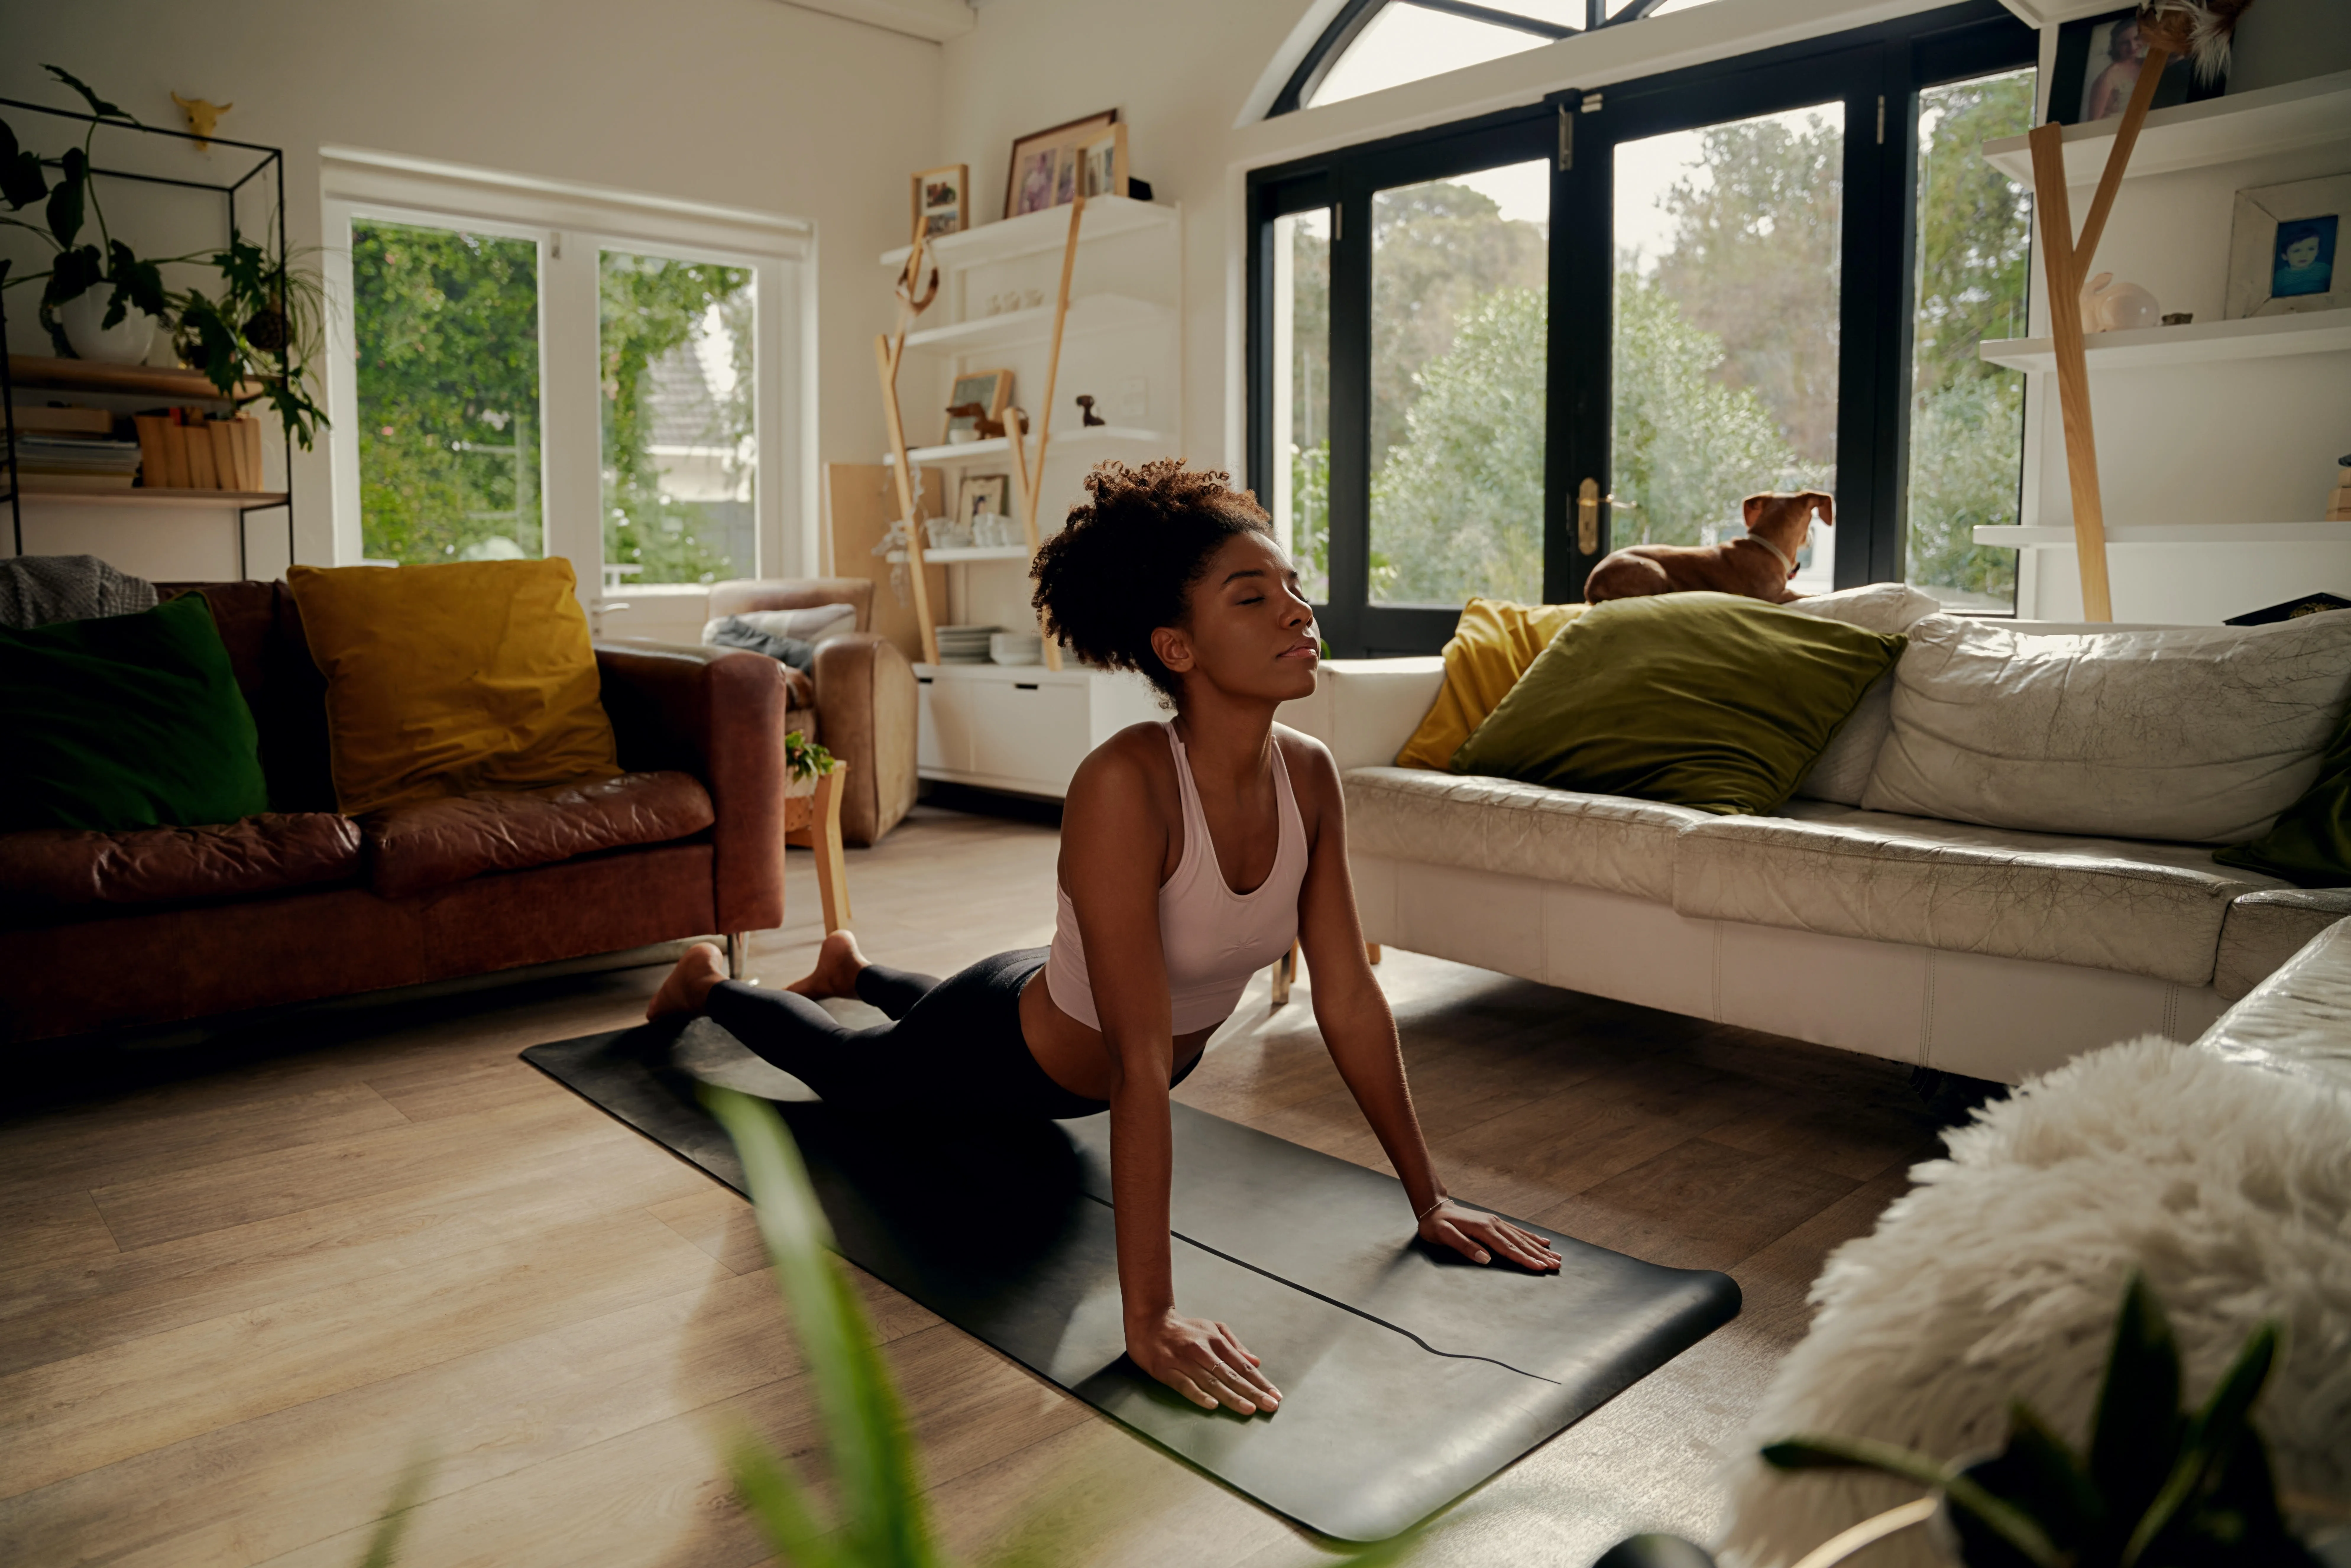 A woman participating in yoga at home